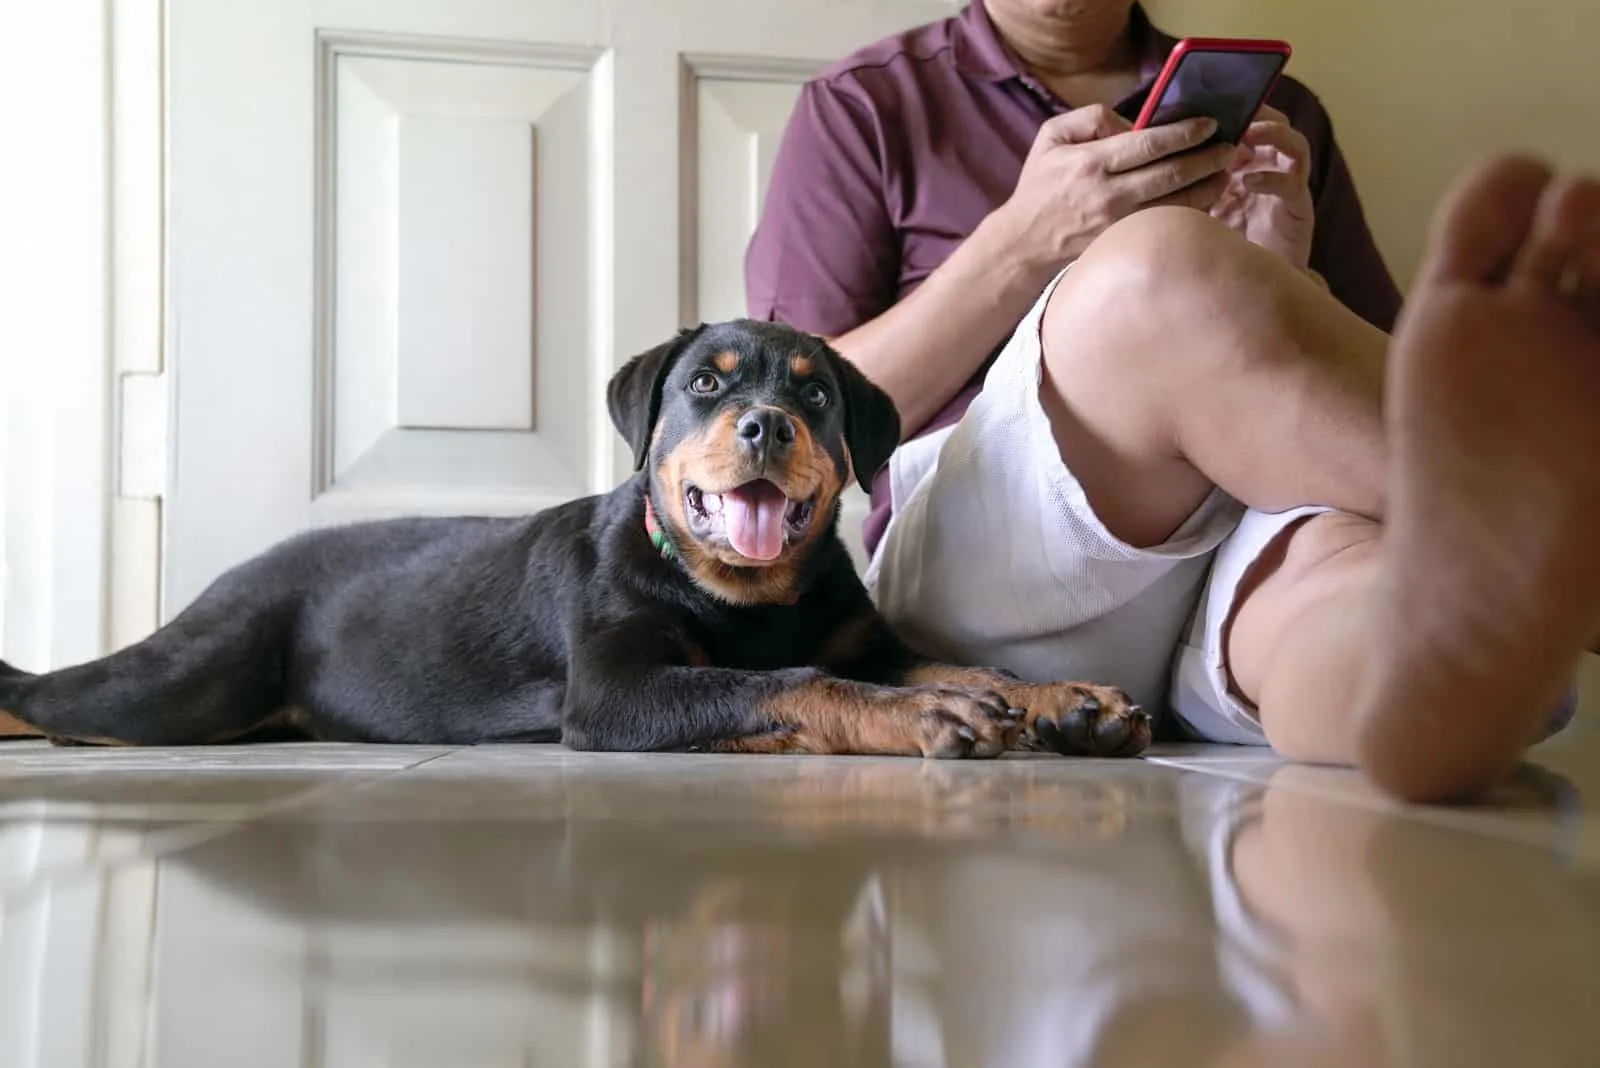 A Rottweiler puppy sits next to the owner